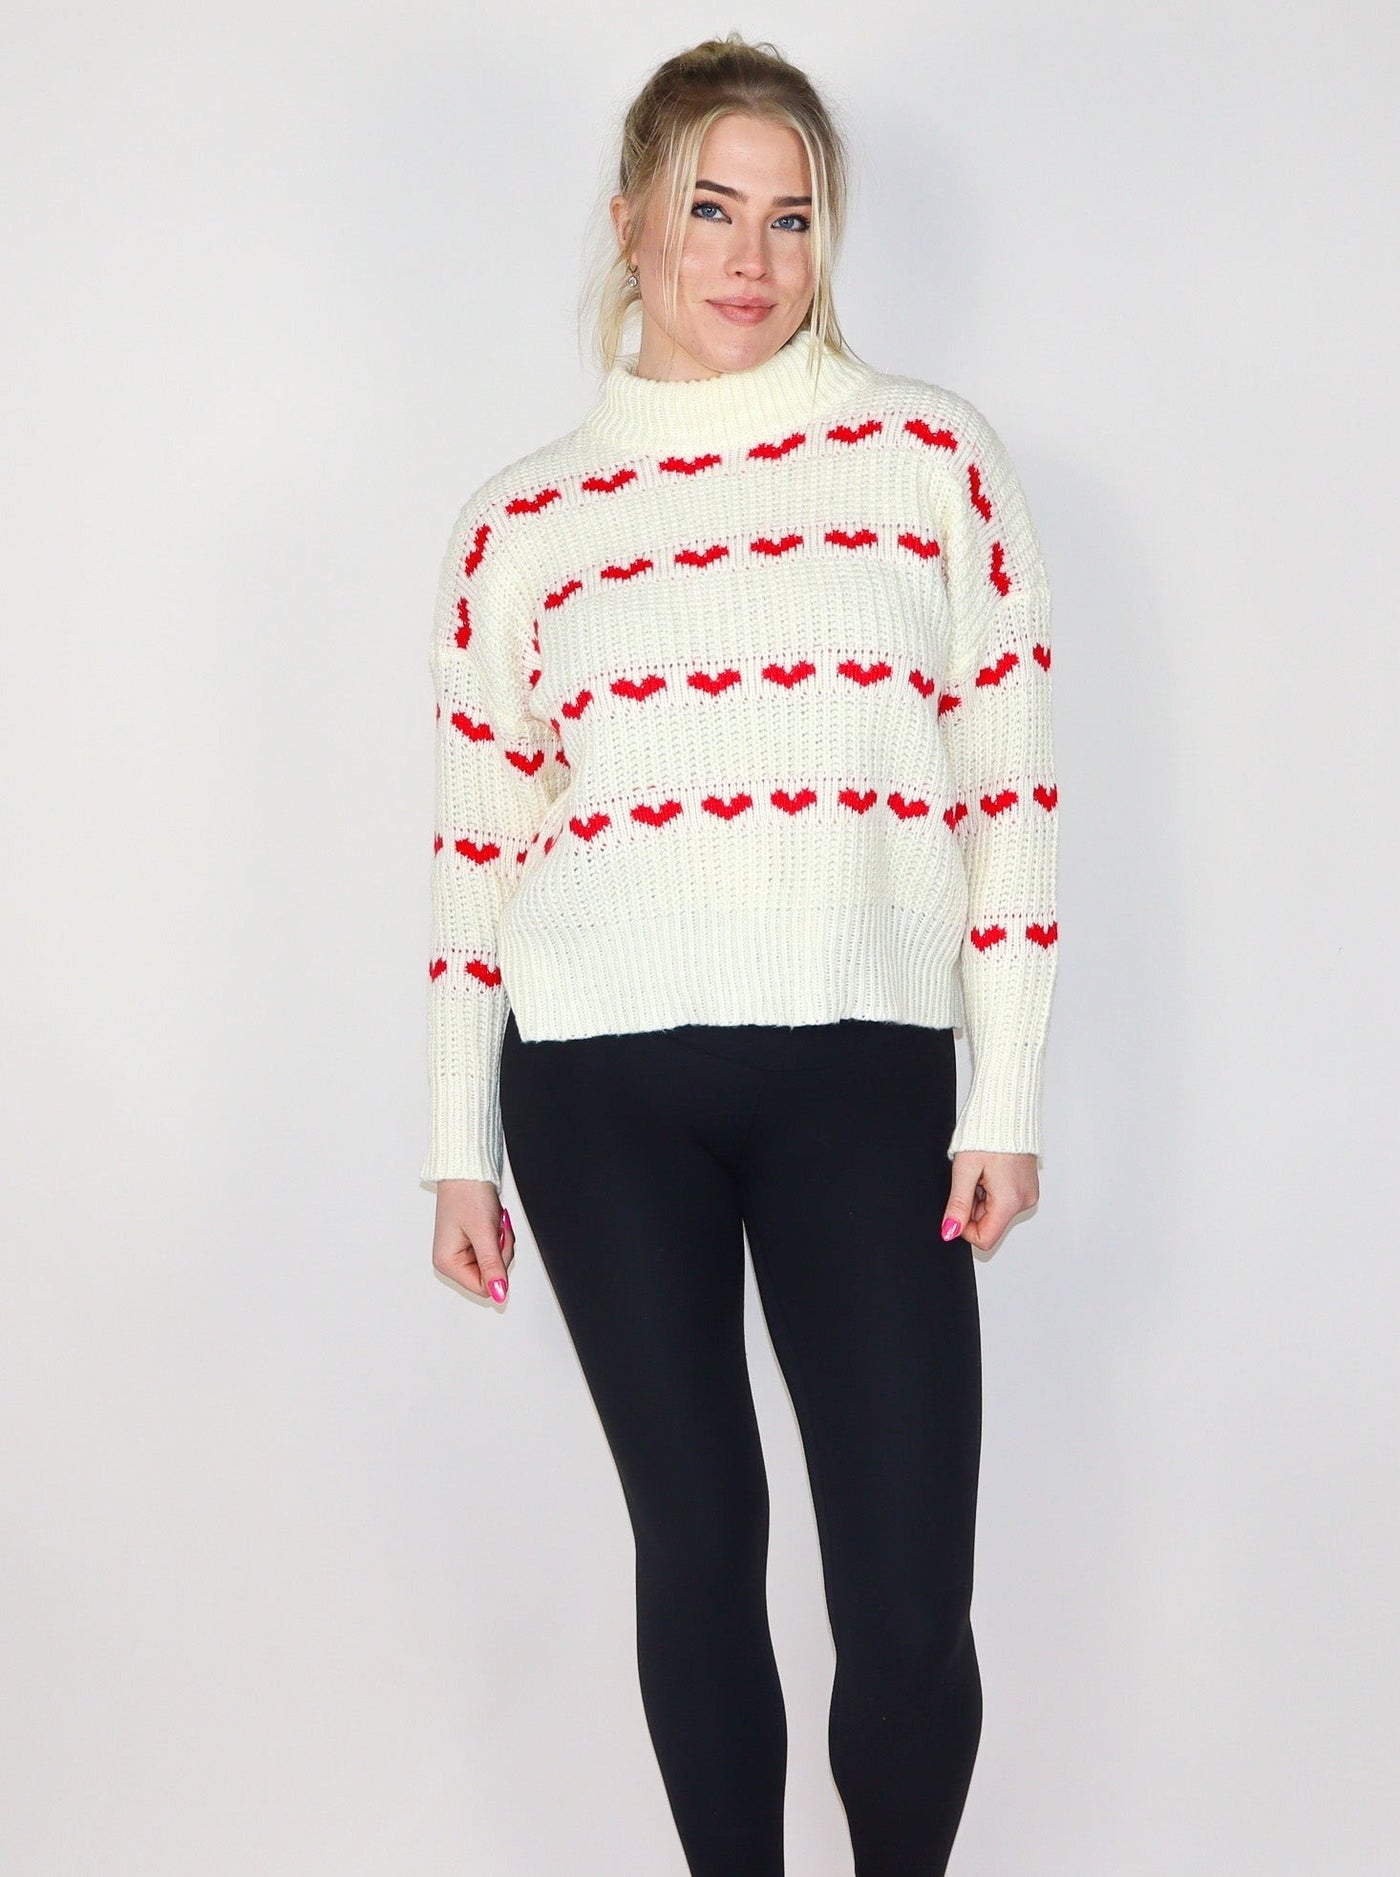 Model is wearing a white knitted turtle neck sweater with horizontal rows of small red hearts. 